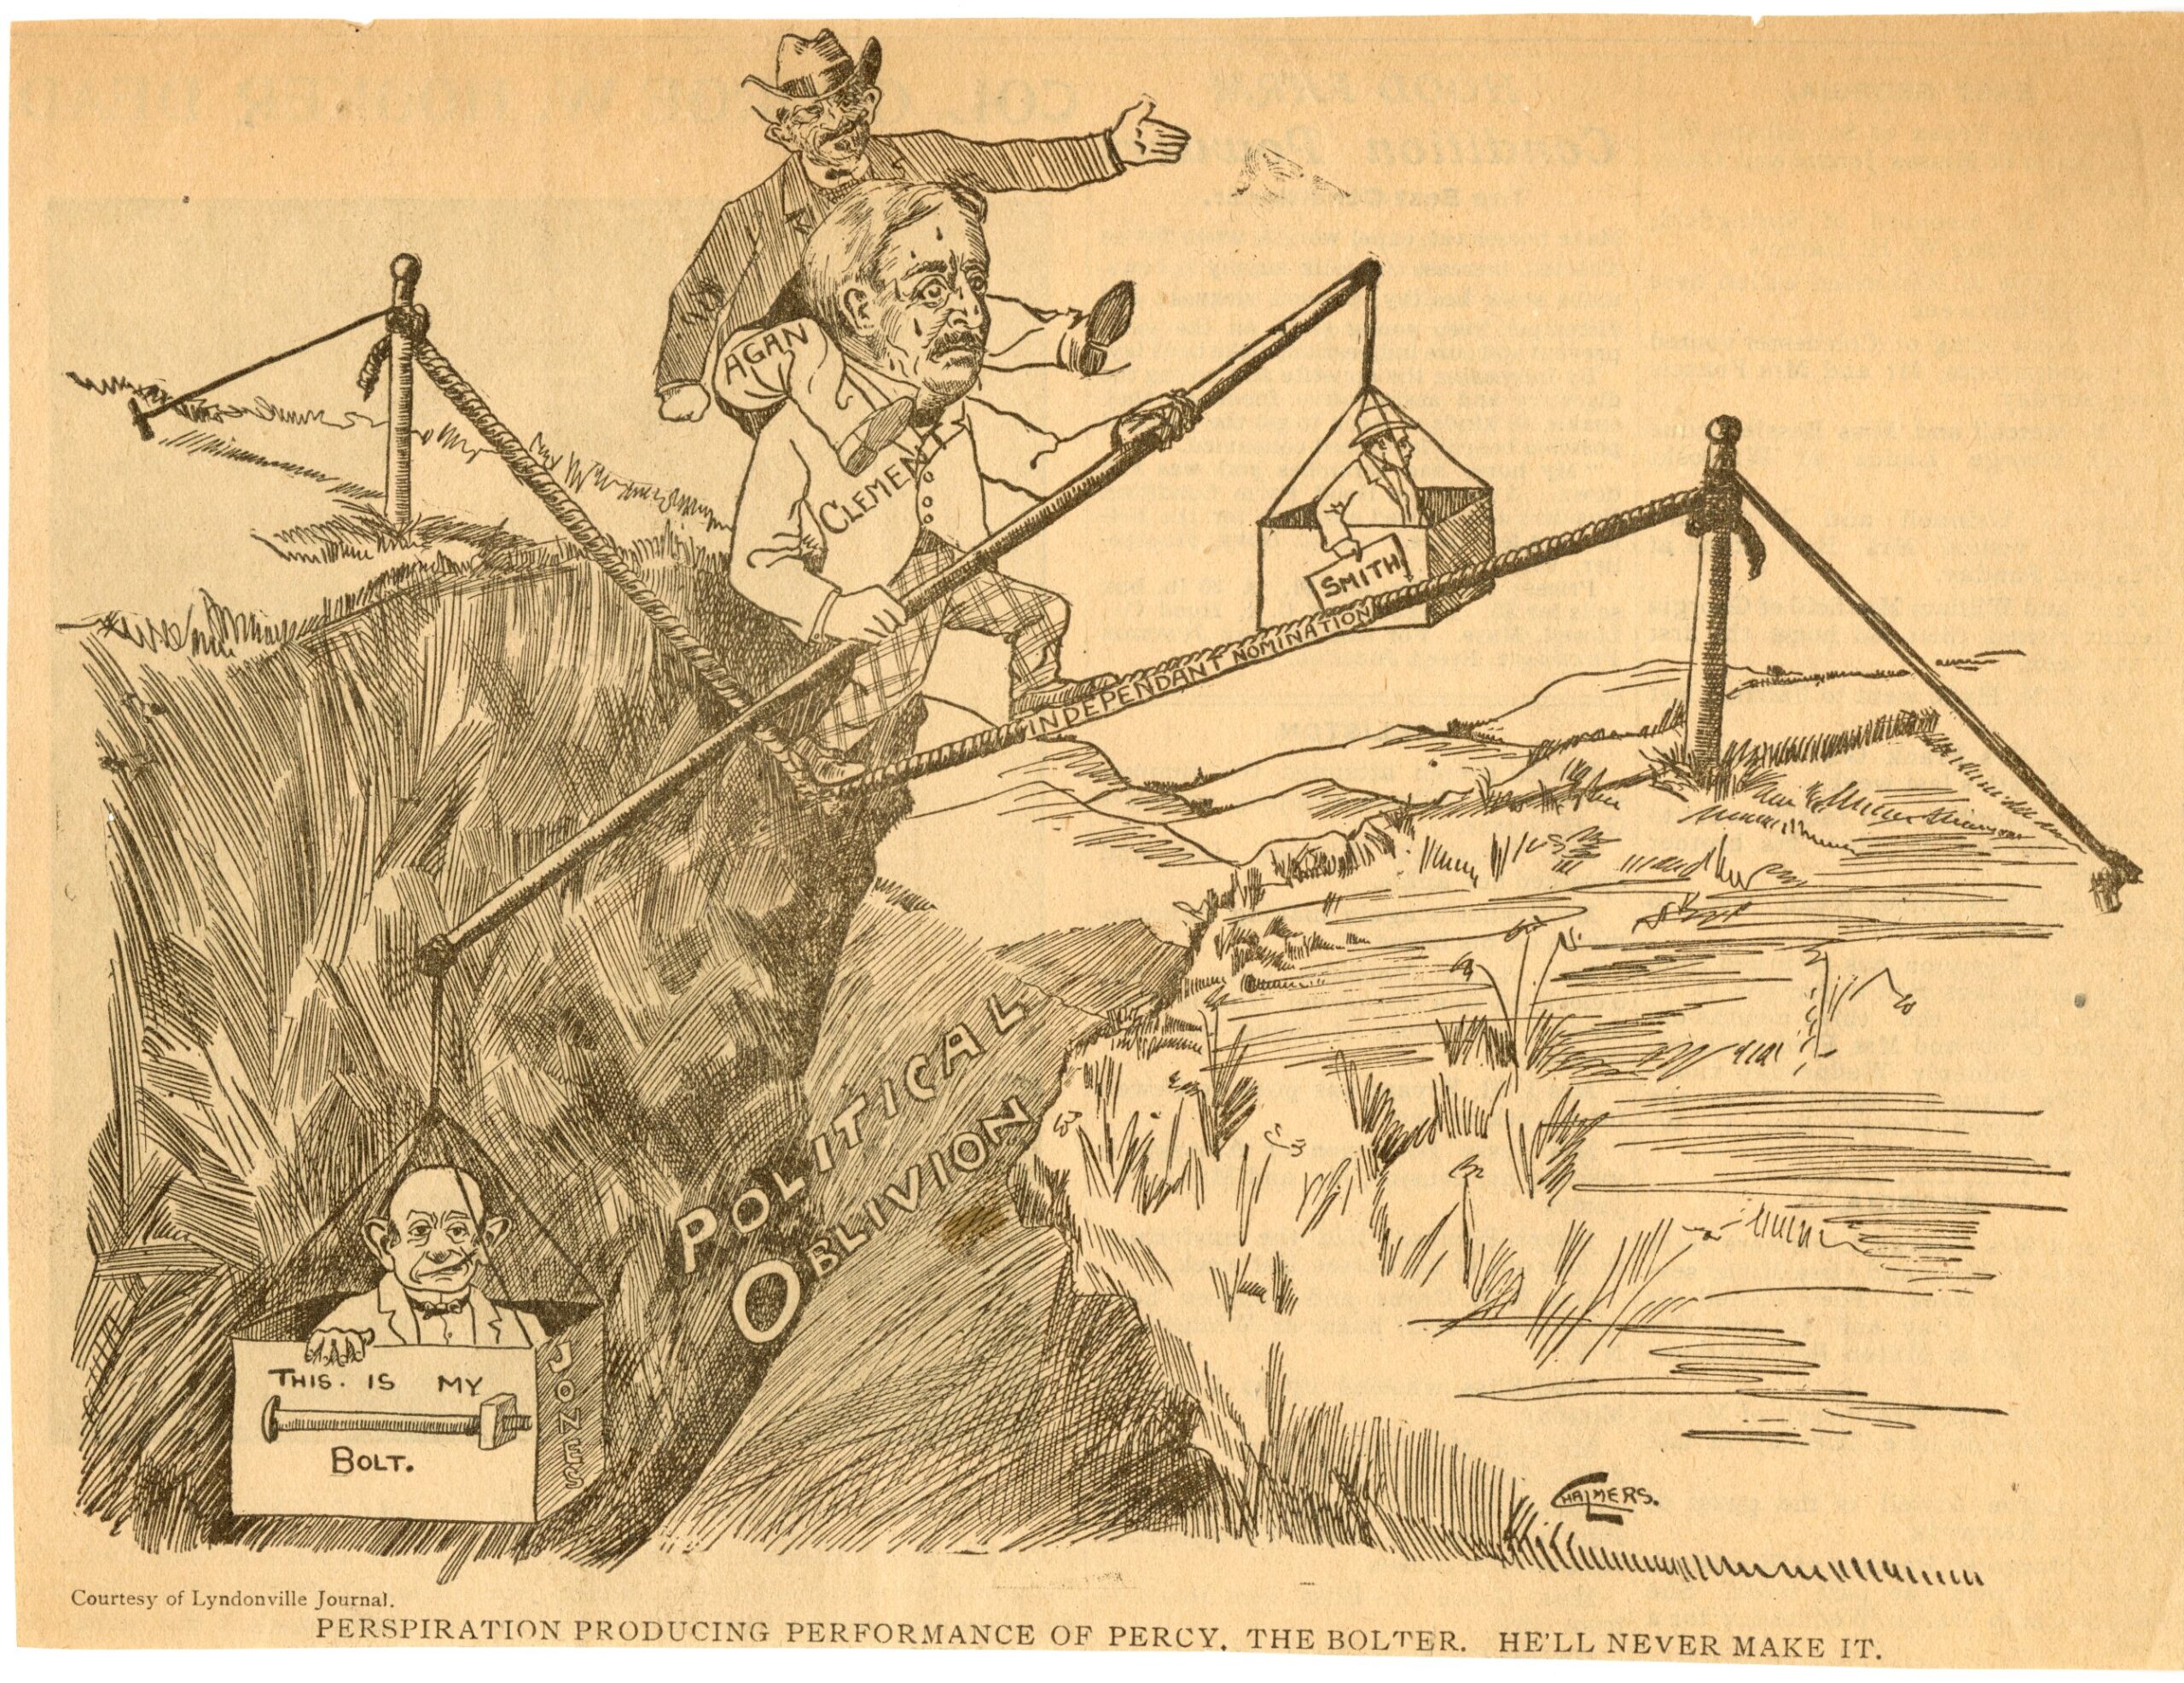 Cartoon shows Percival Clement trying to cross a gully on a breaking tight rope, about to plunge into "political oblivion."